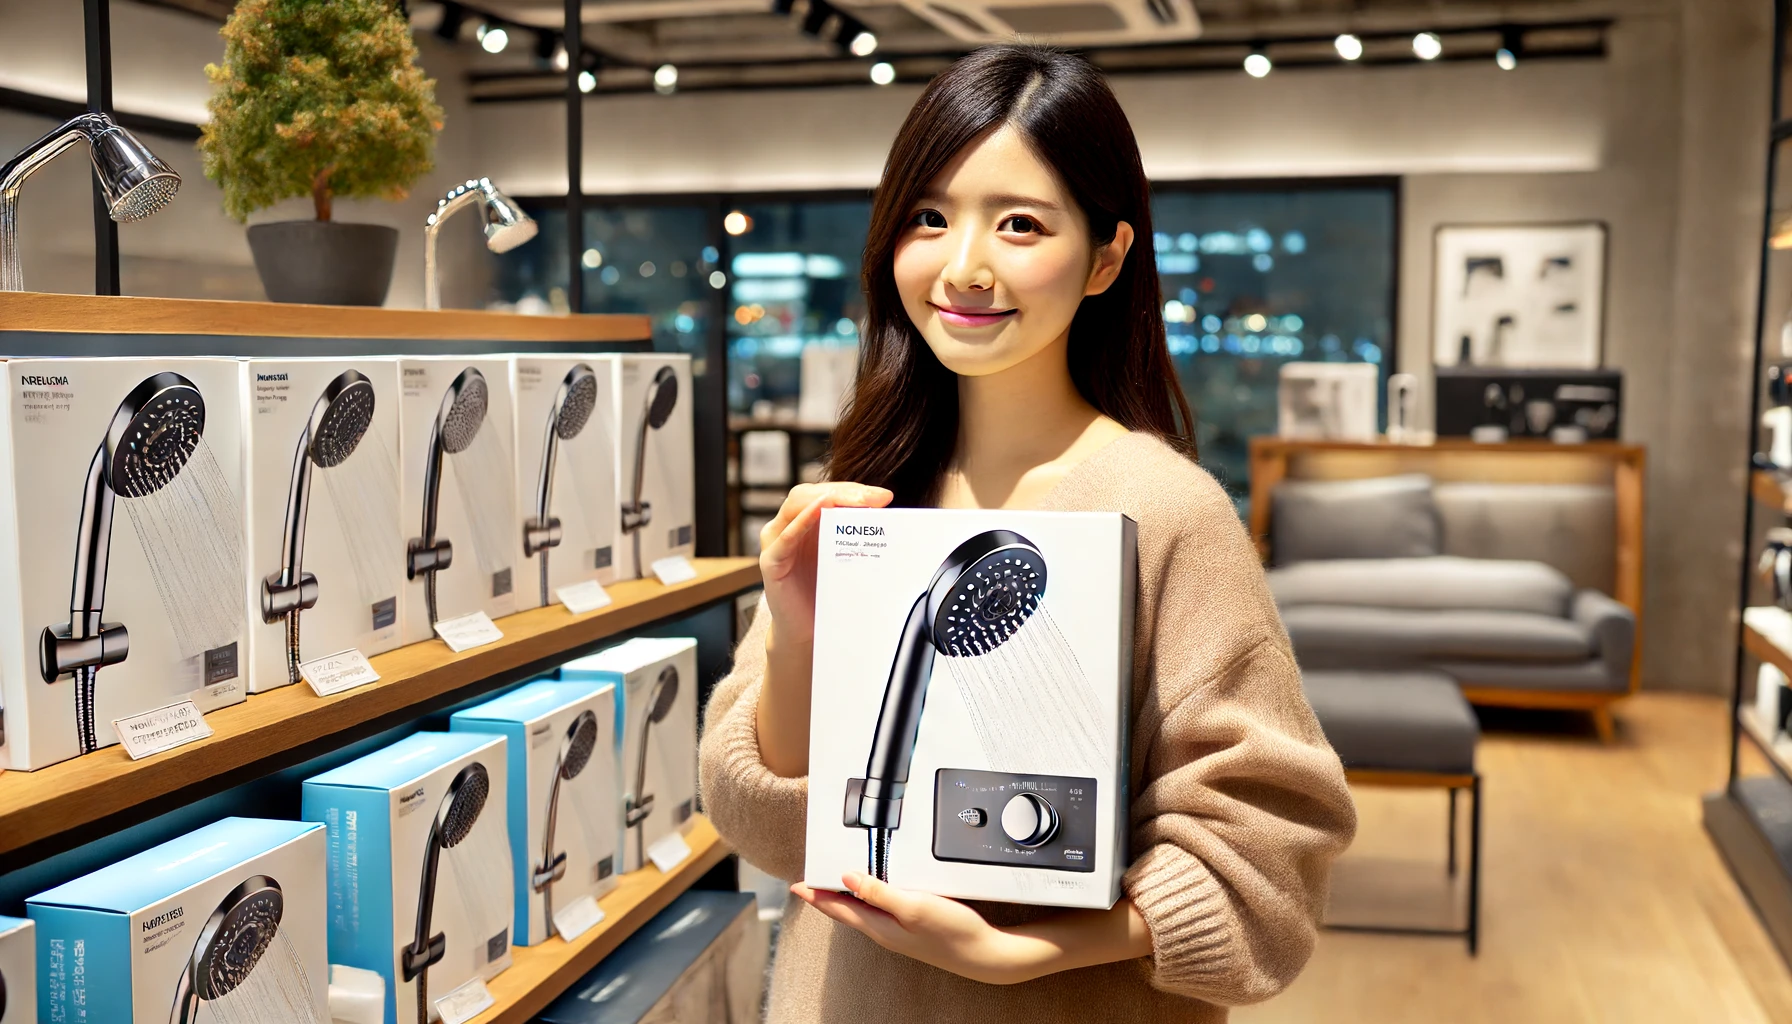 A Japanese woman deciding to purchase a luxury handheld shower head in a modern store. She looks happy and confident, with the shower head box in her hands and a display of various models in the background.